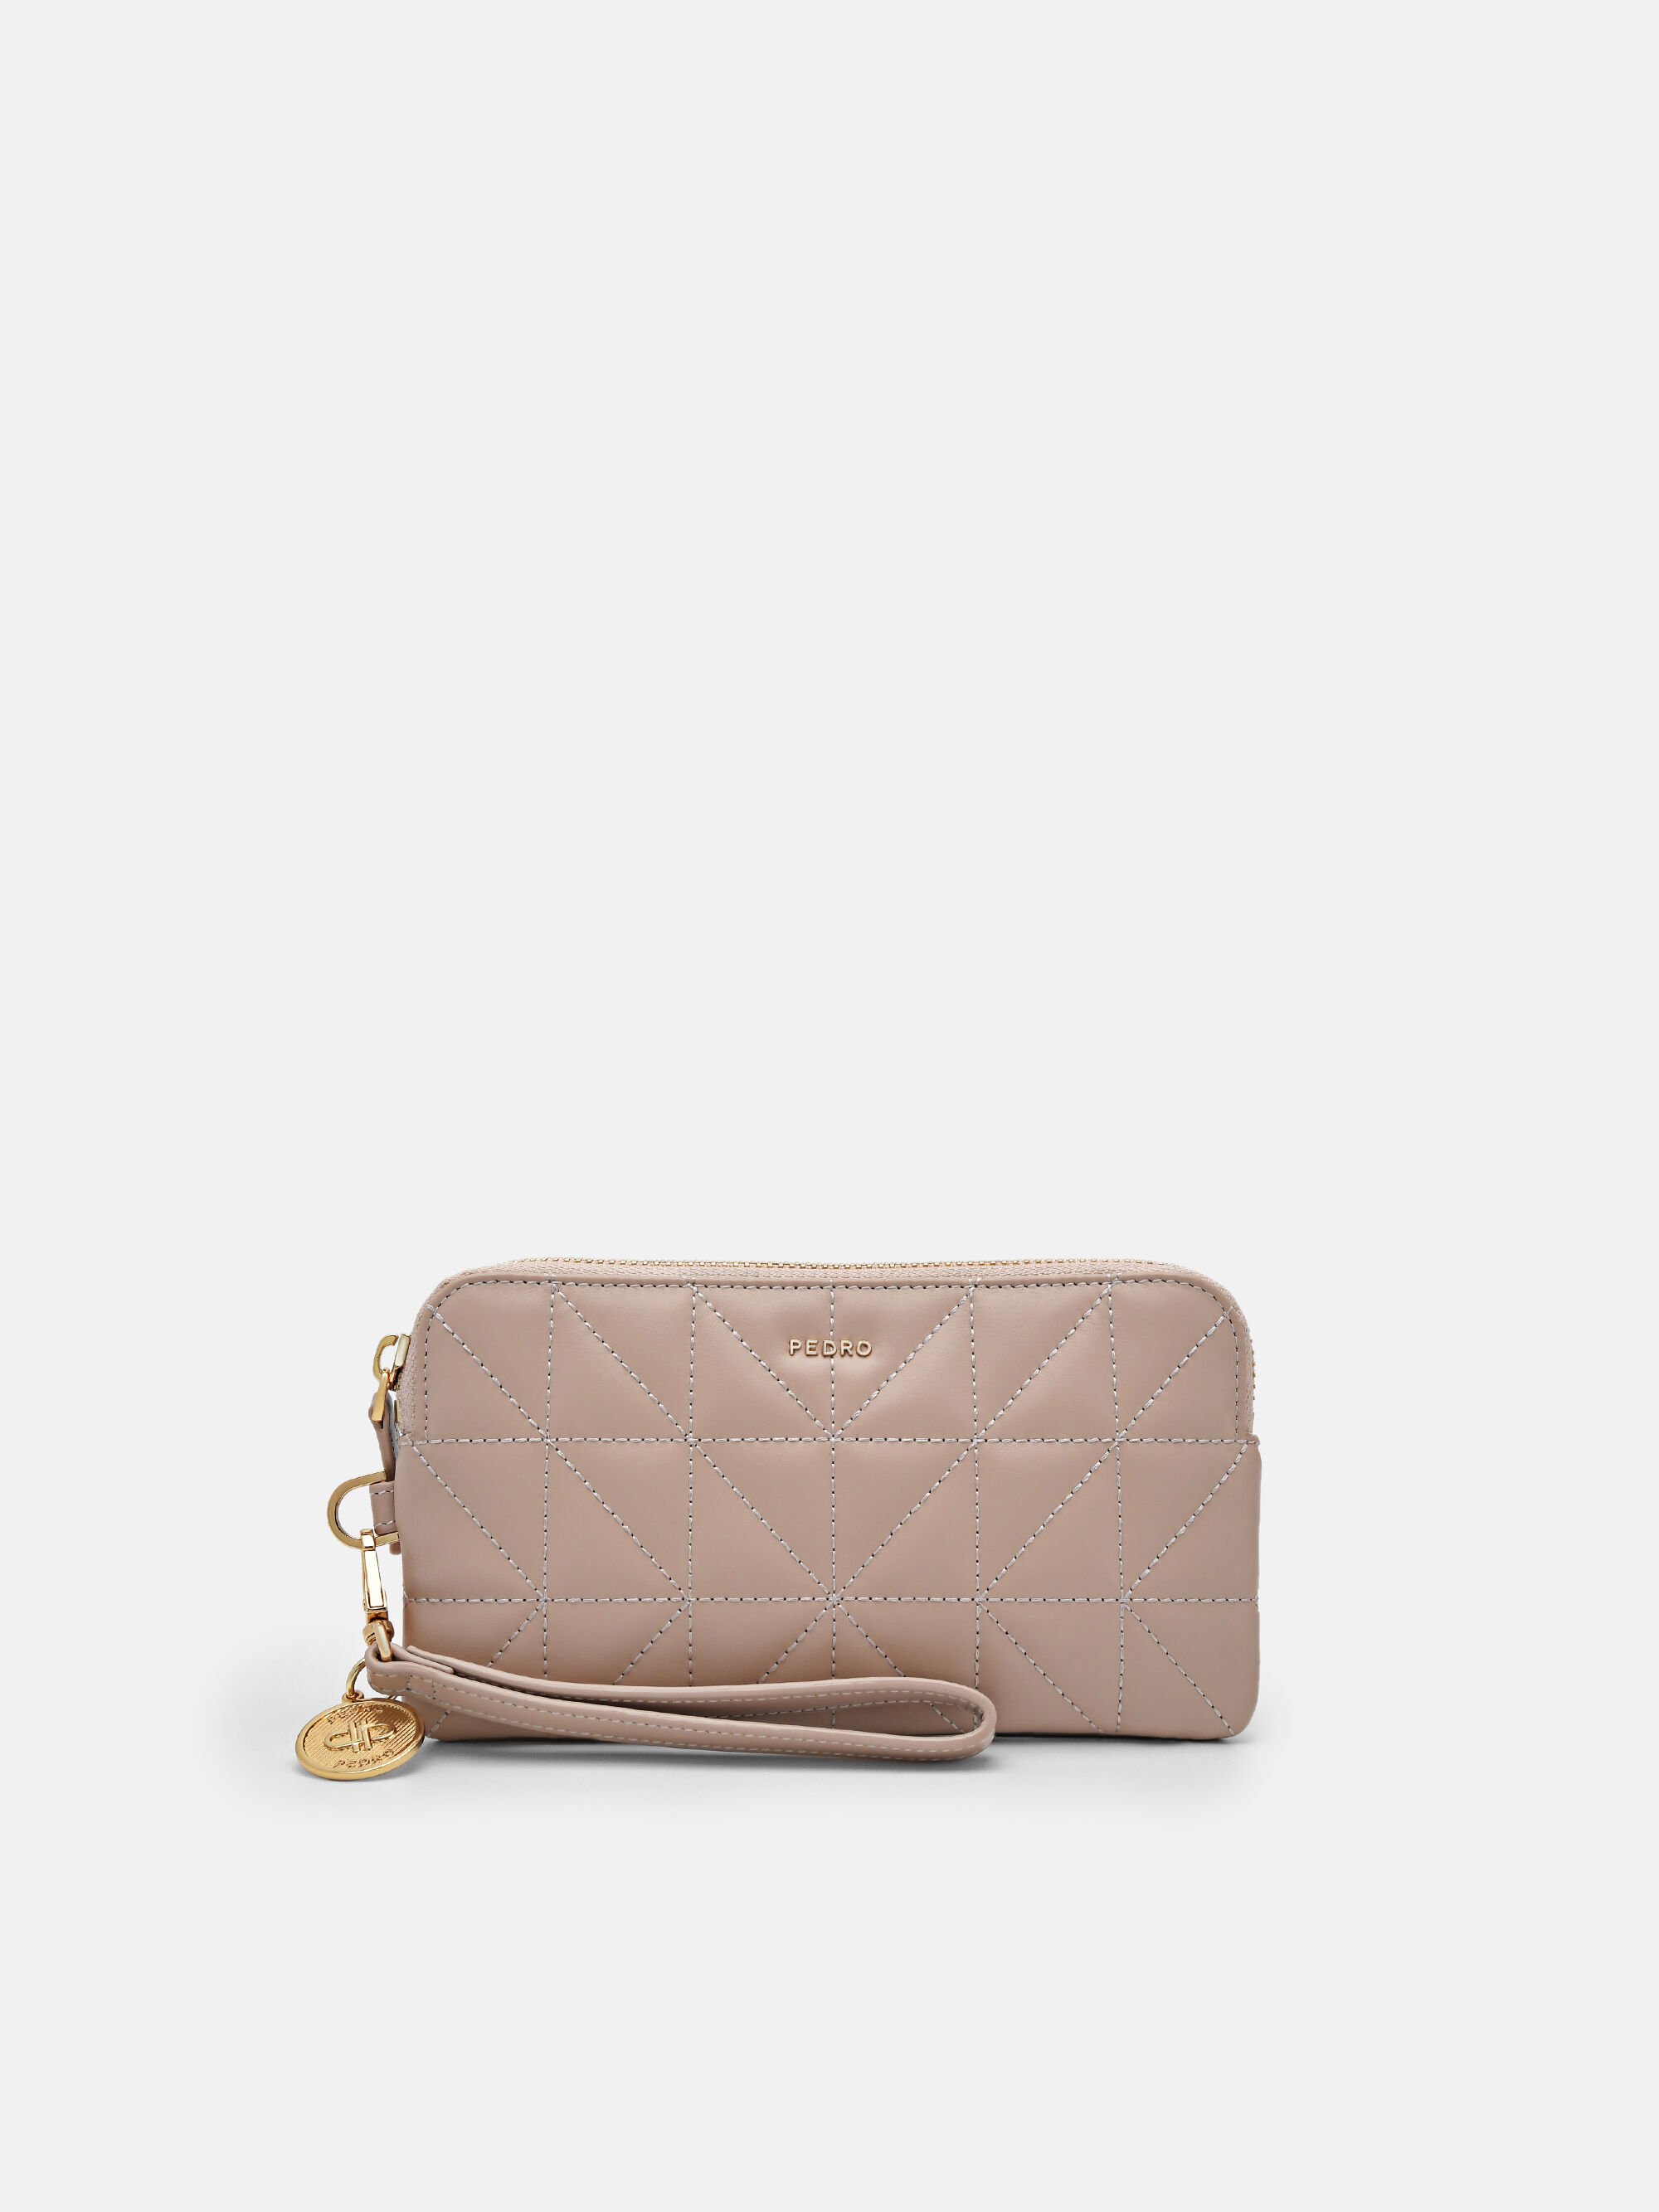 PEDRO Studio Leather Pouch in Pixel, Nude